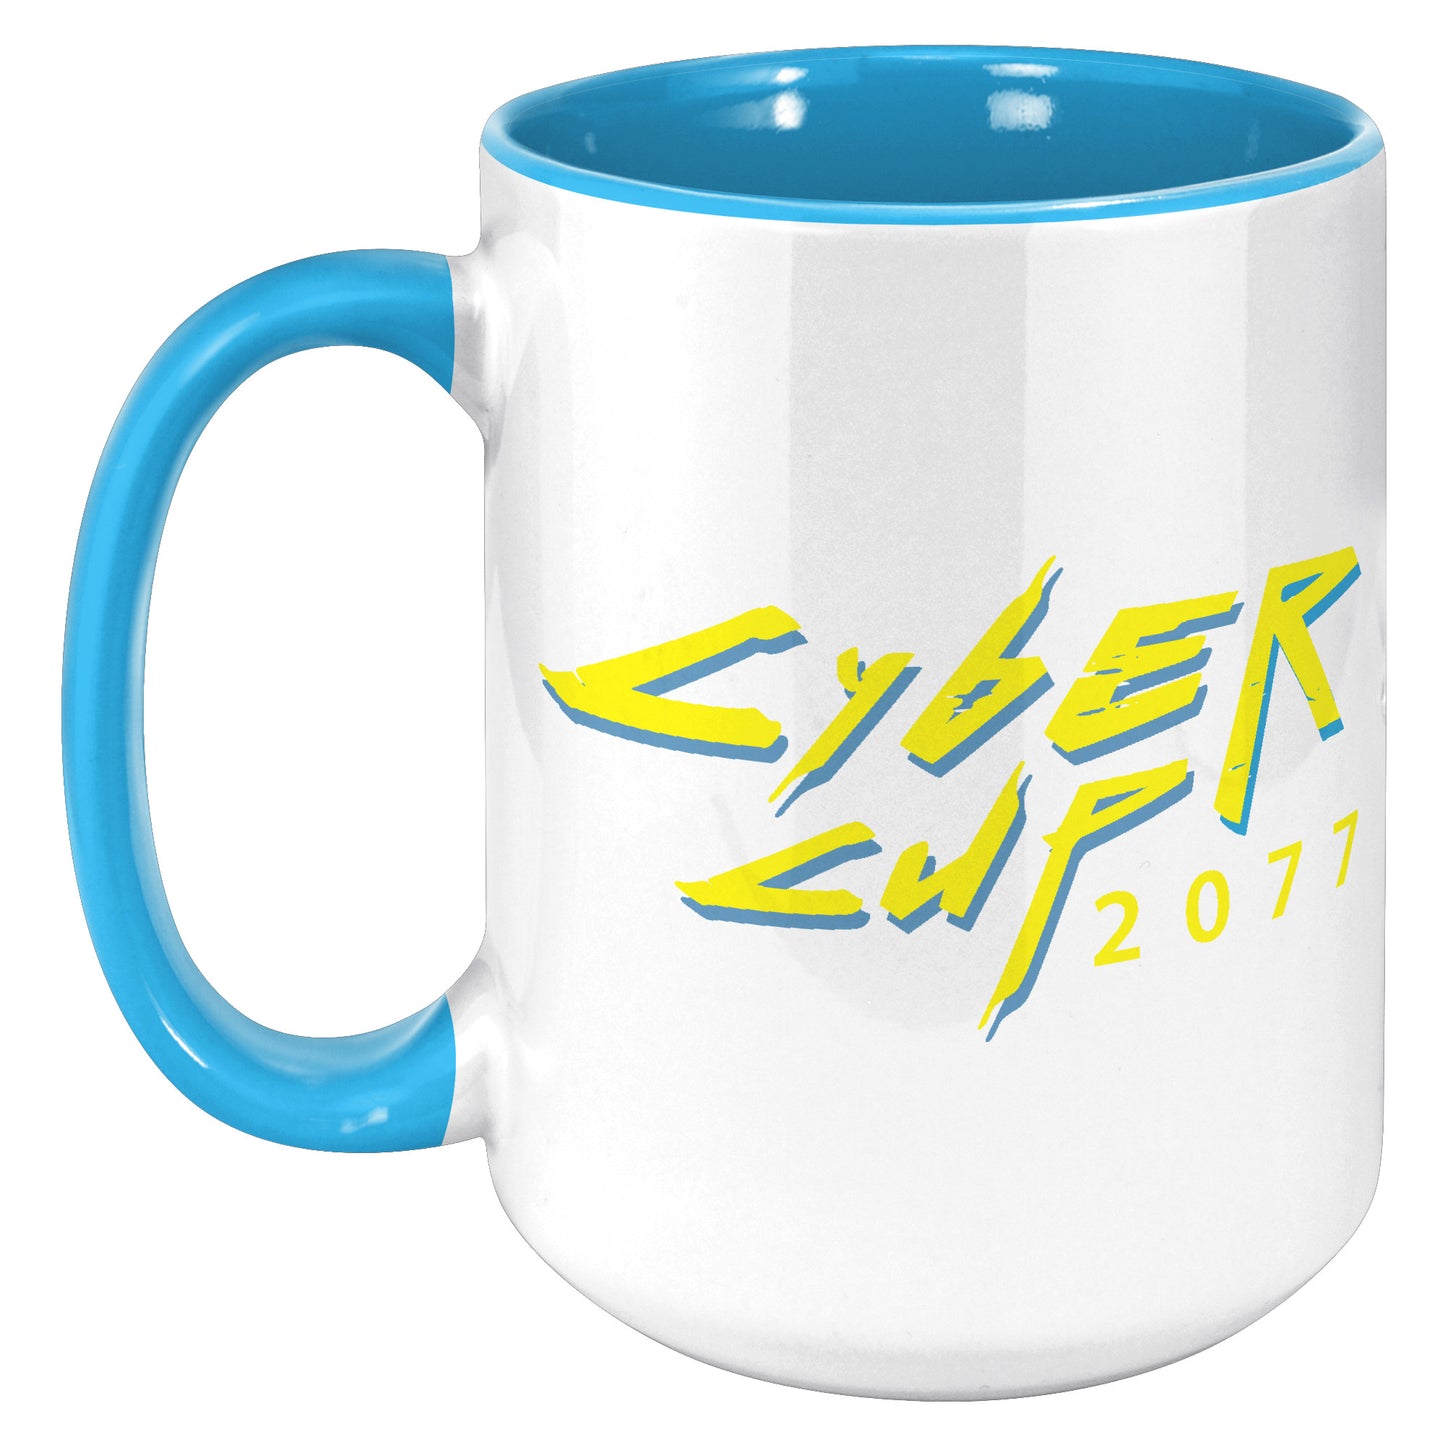 CYBER CUP 2077